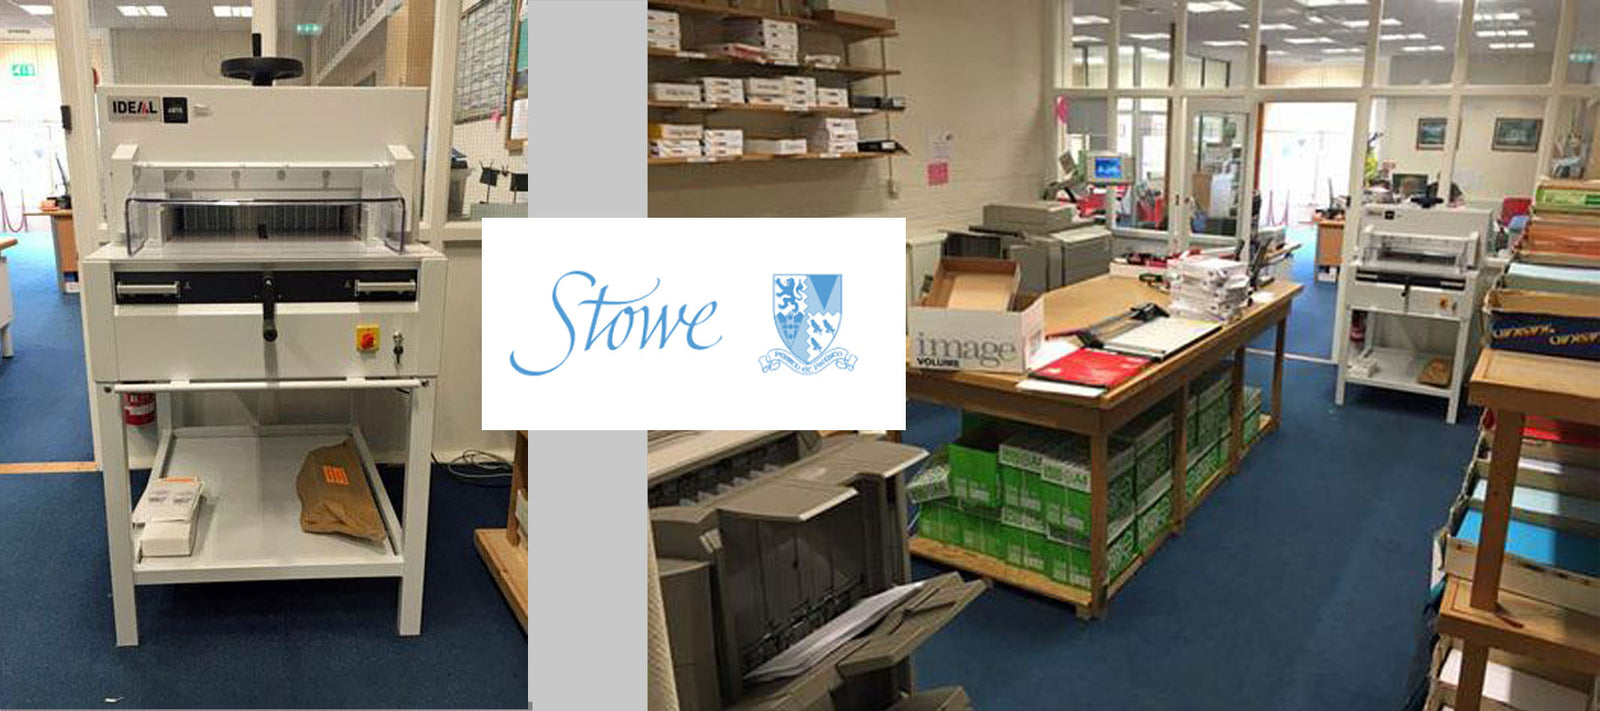 Stowe School upgrade to a new Ideal 4815 Guillotine